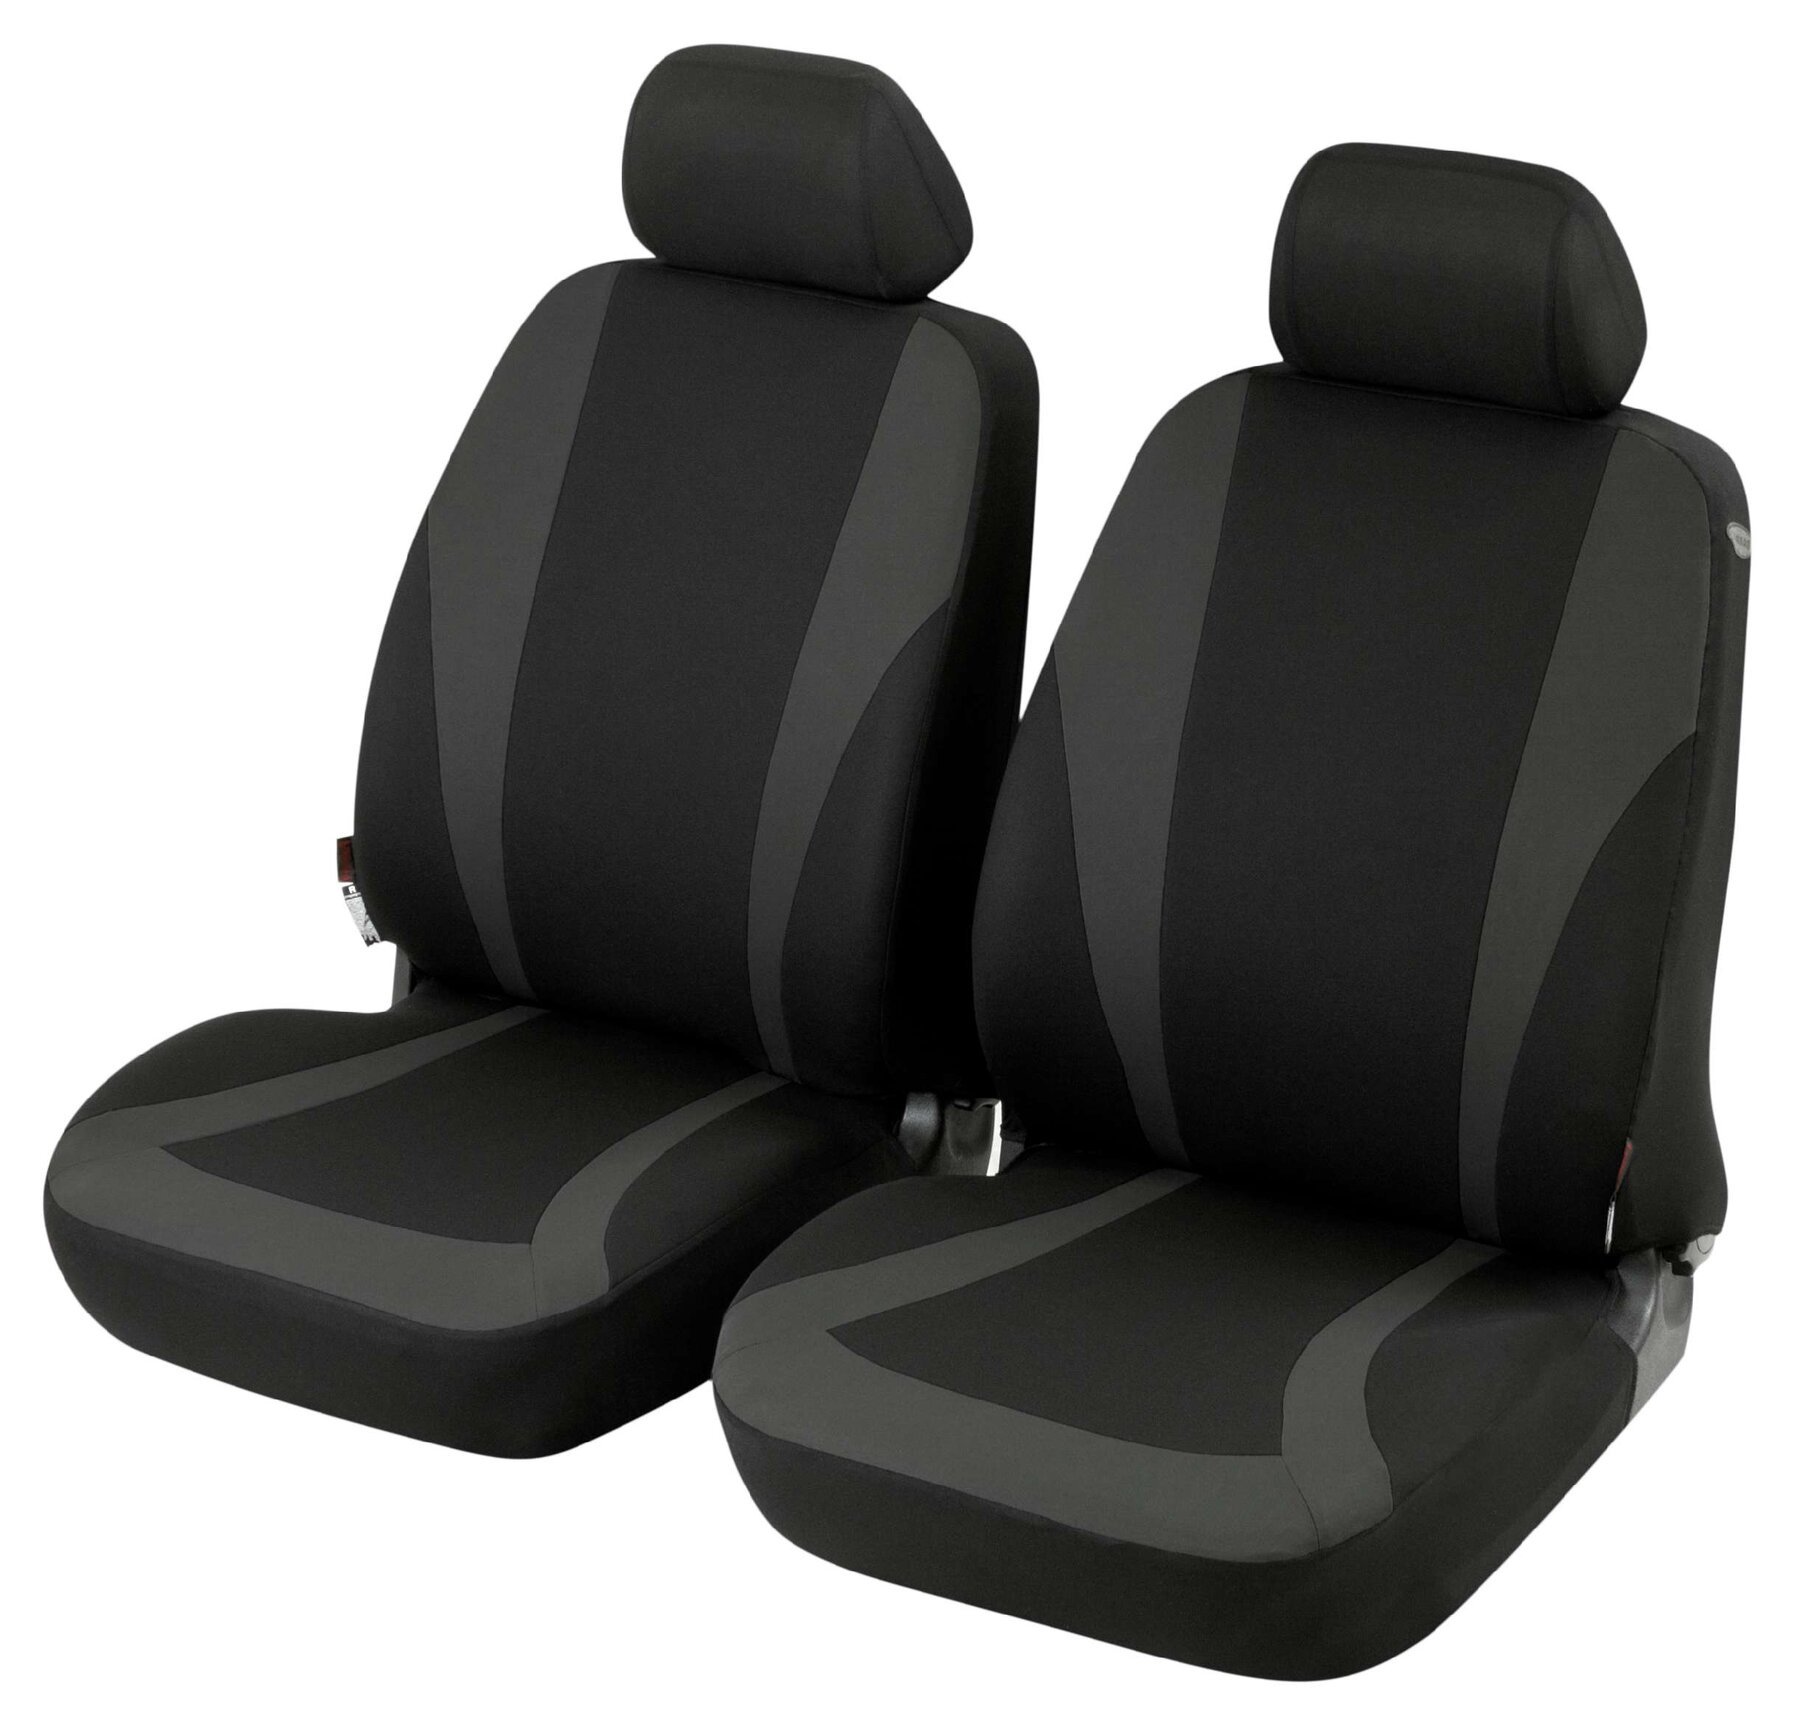 Car Seat cover Mendoza anthracite grey for two front seats